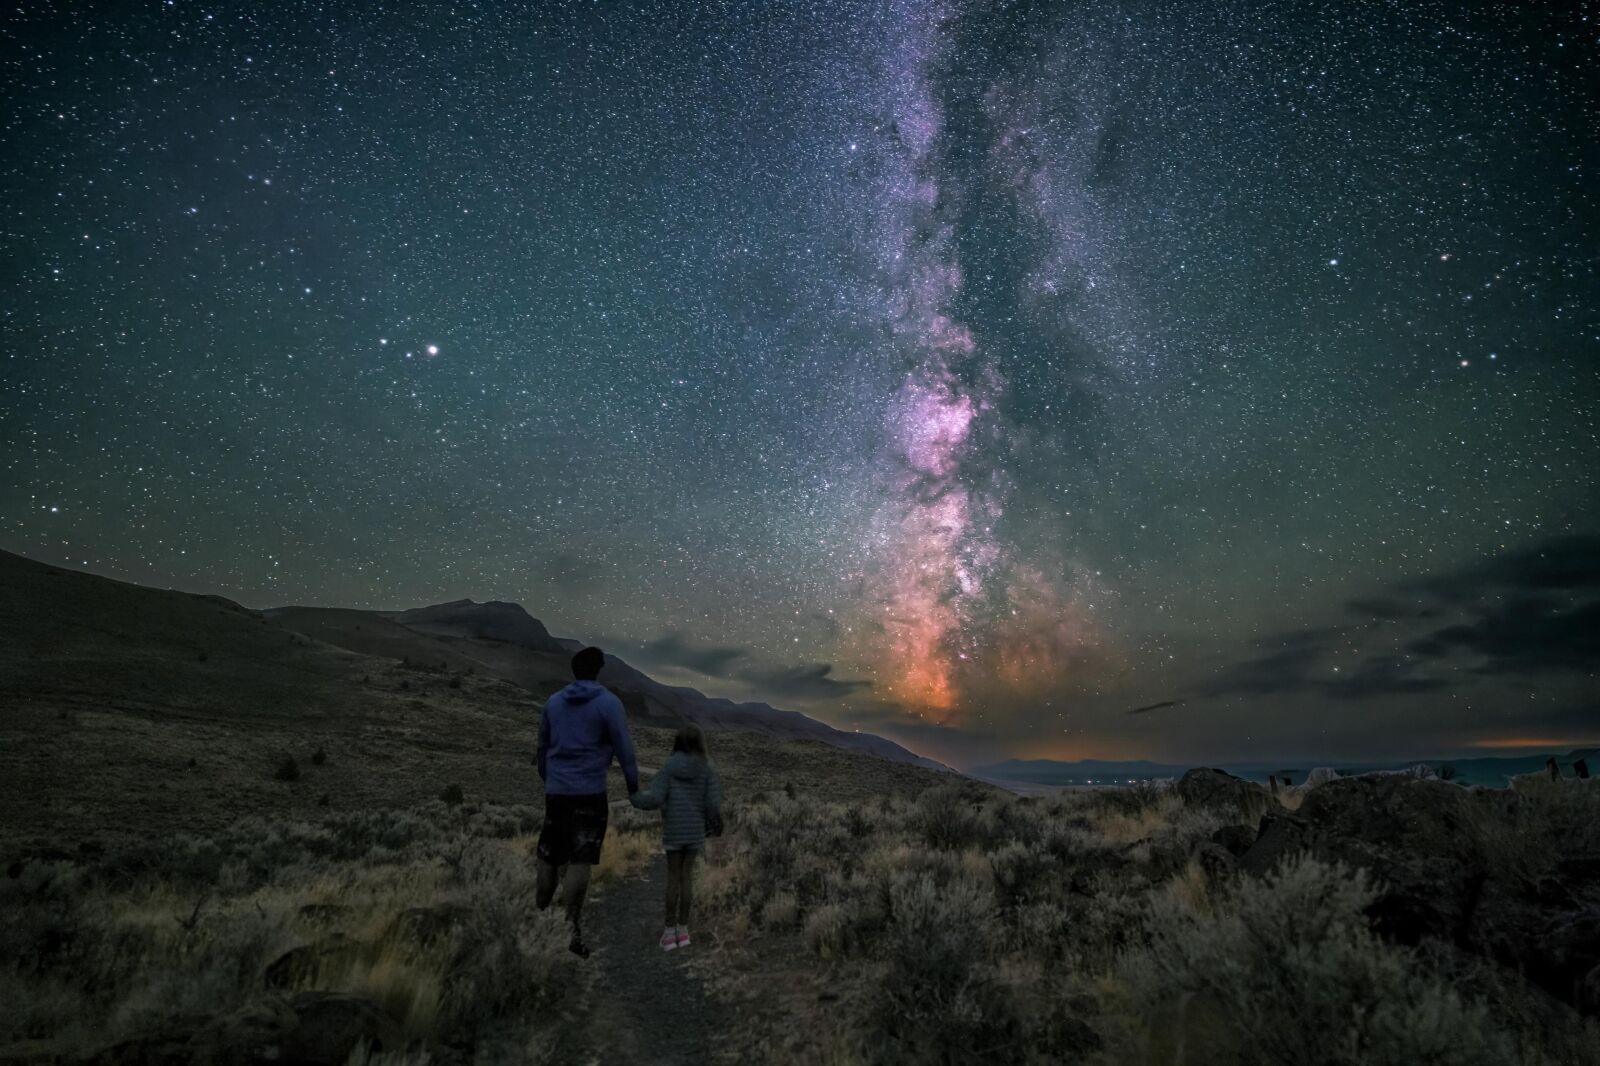 Person and child with star studded night in Oregon Outback